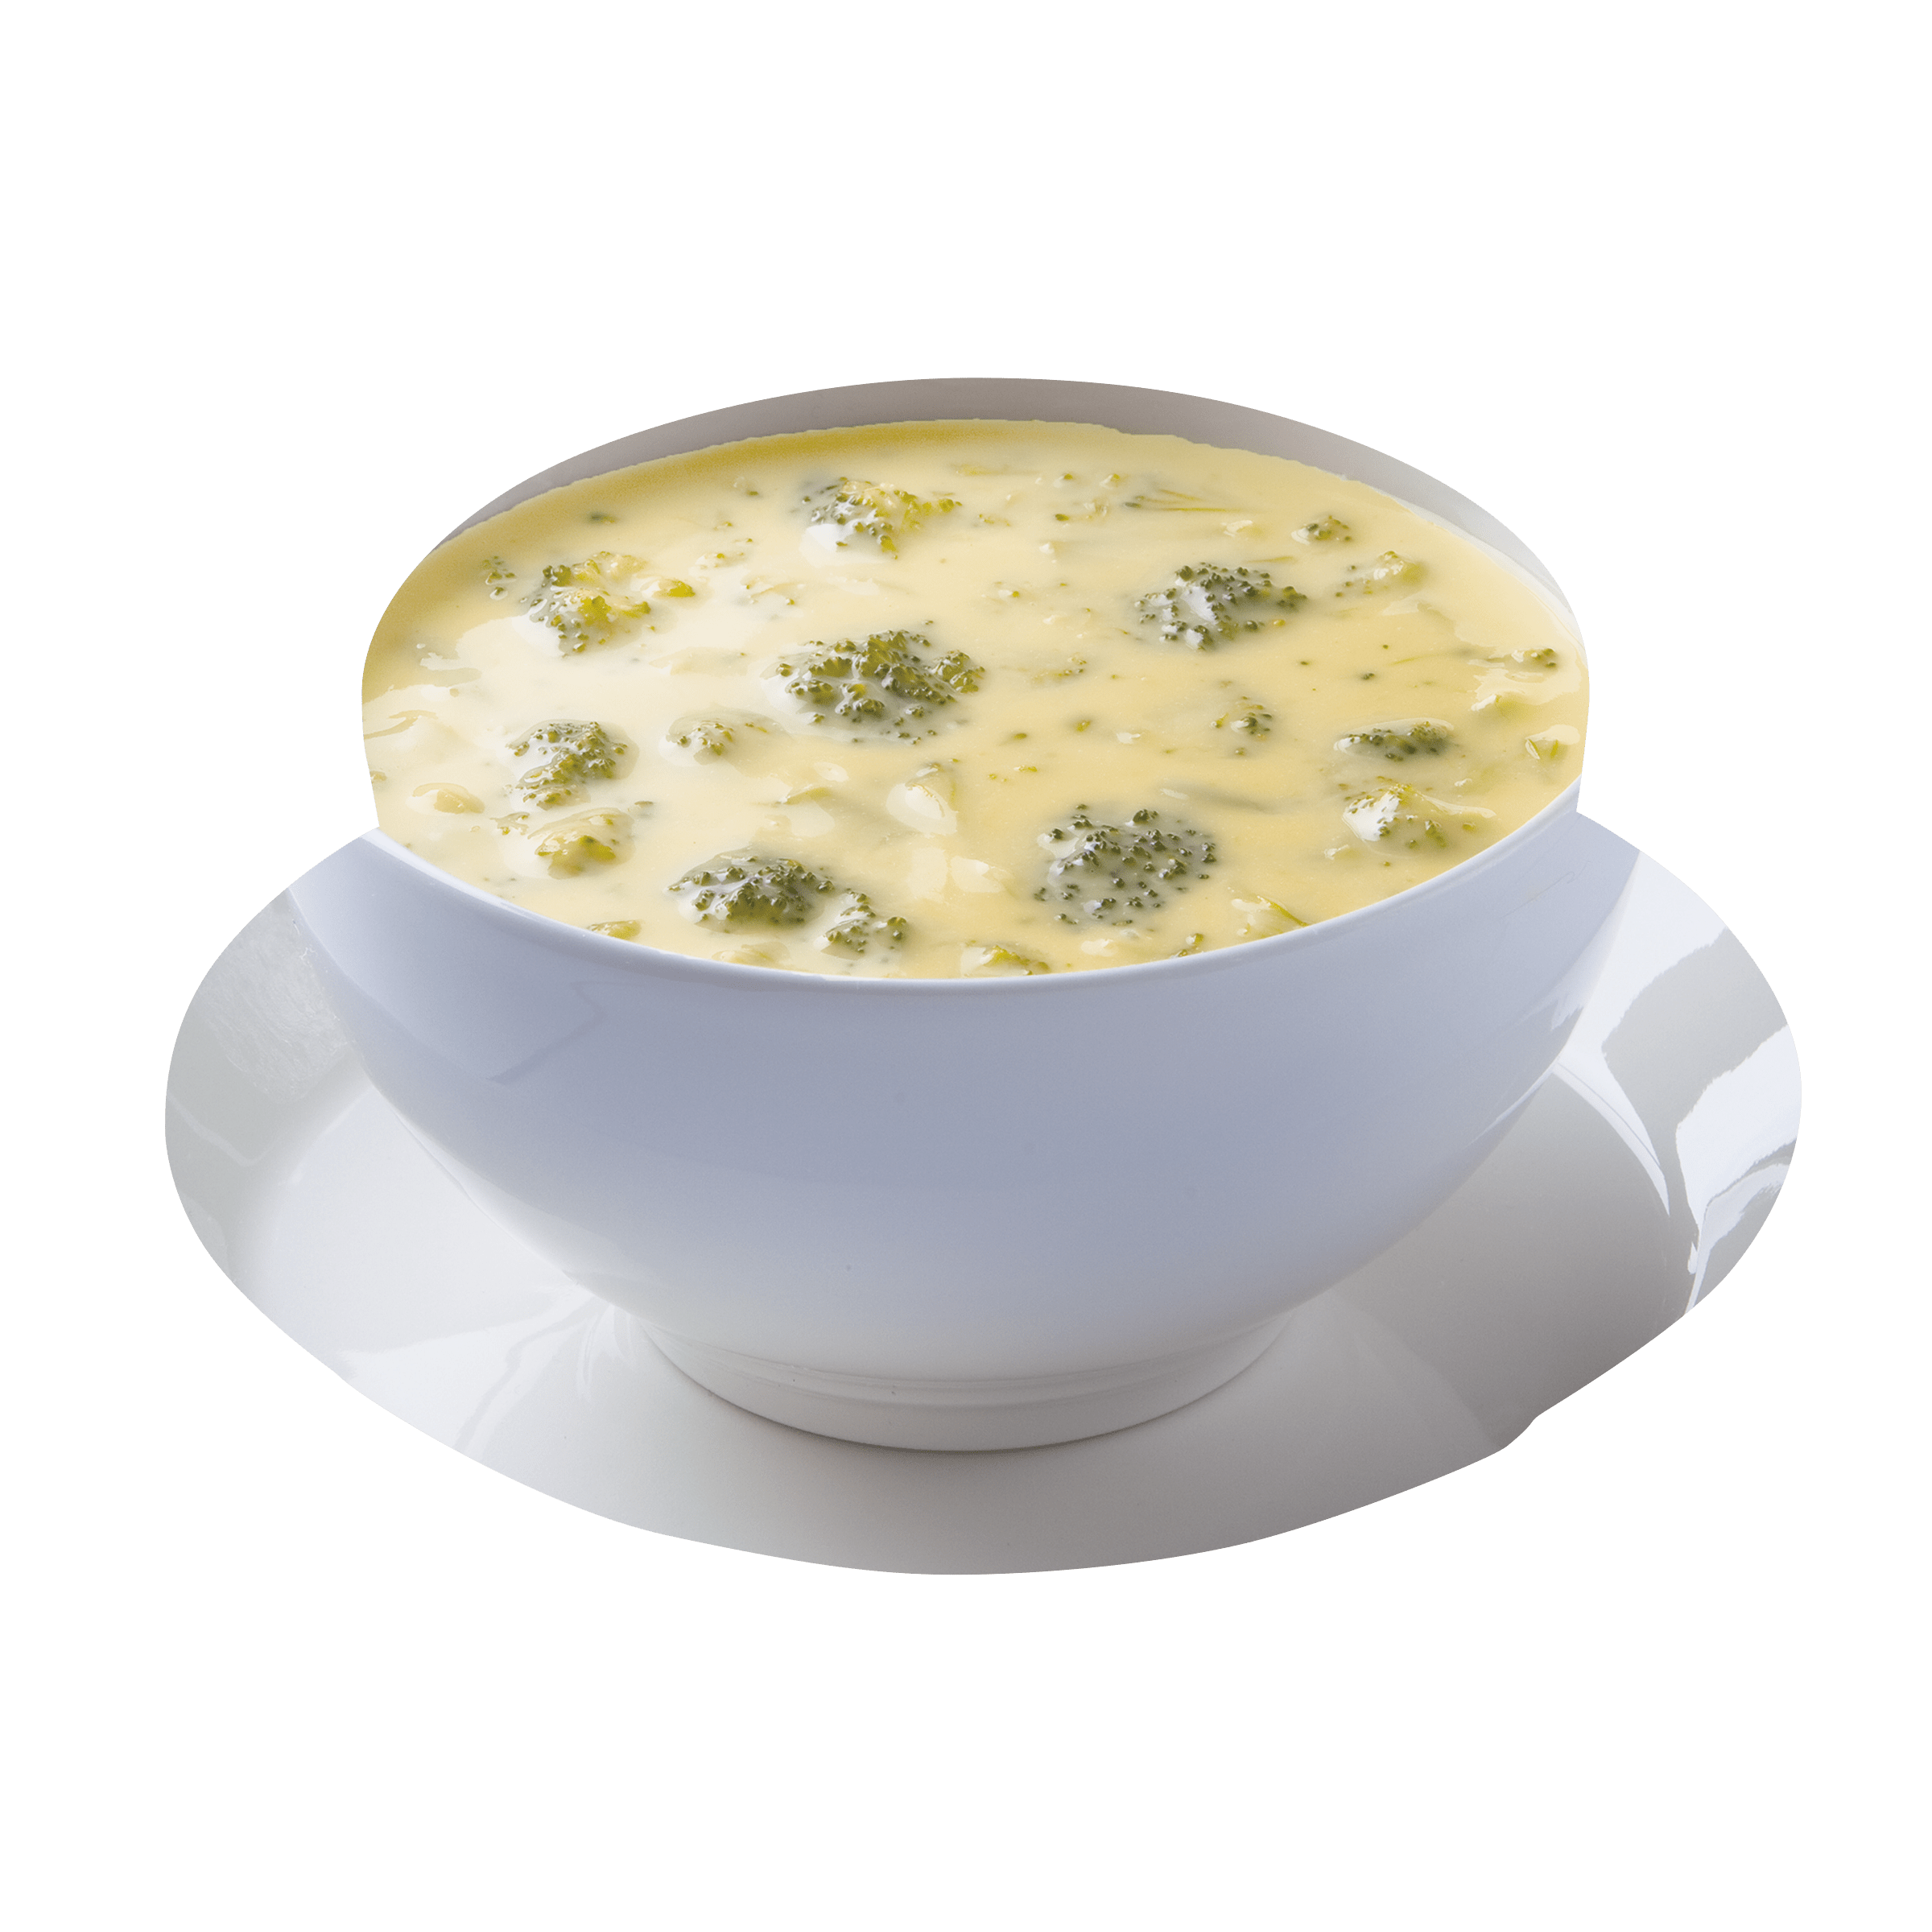 Broccoli & Cheese with Florets Soup